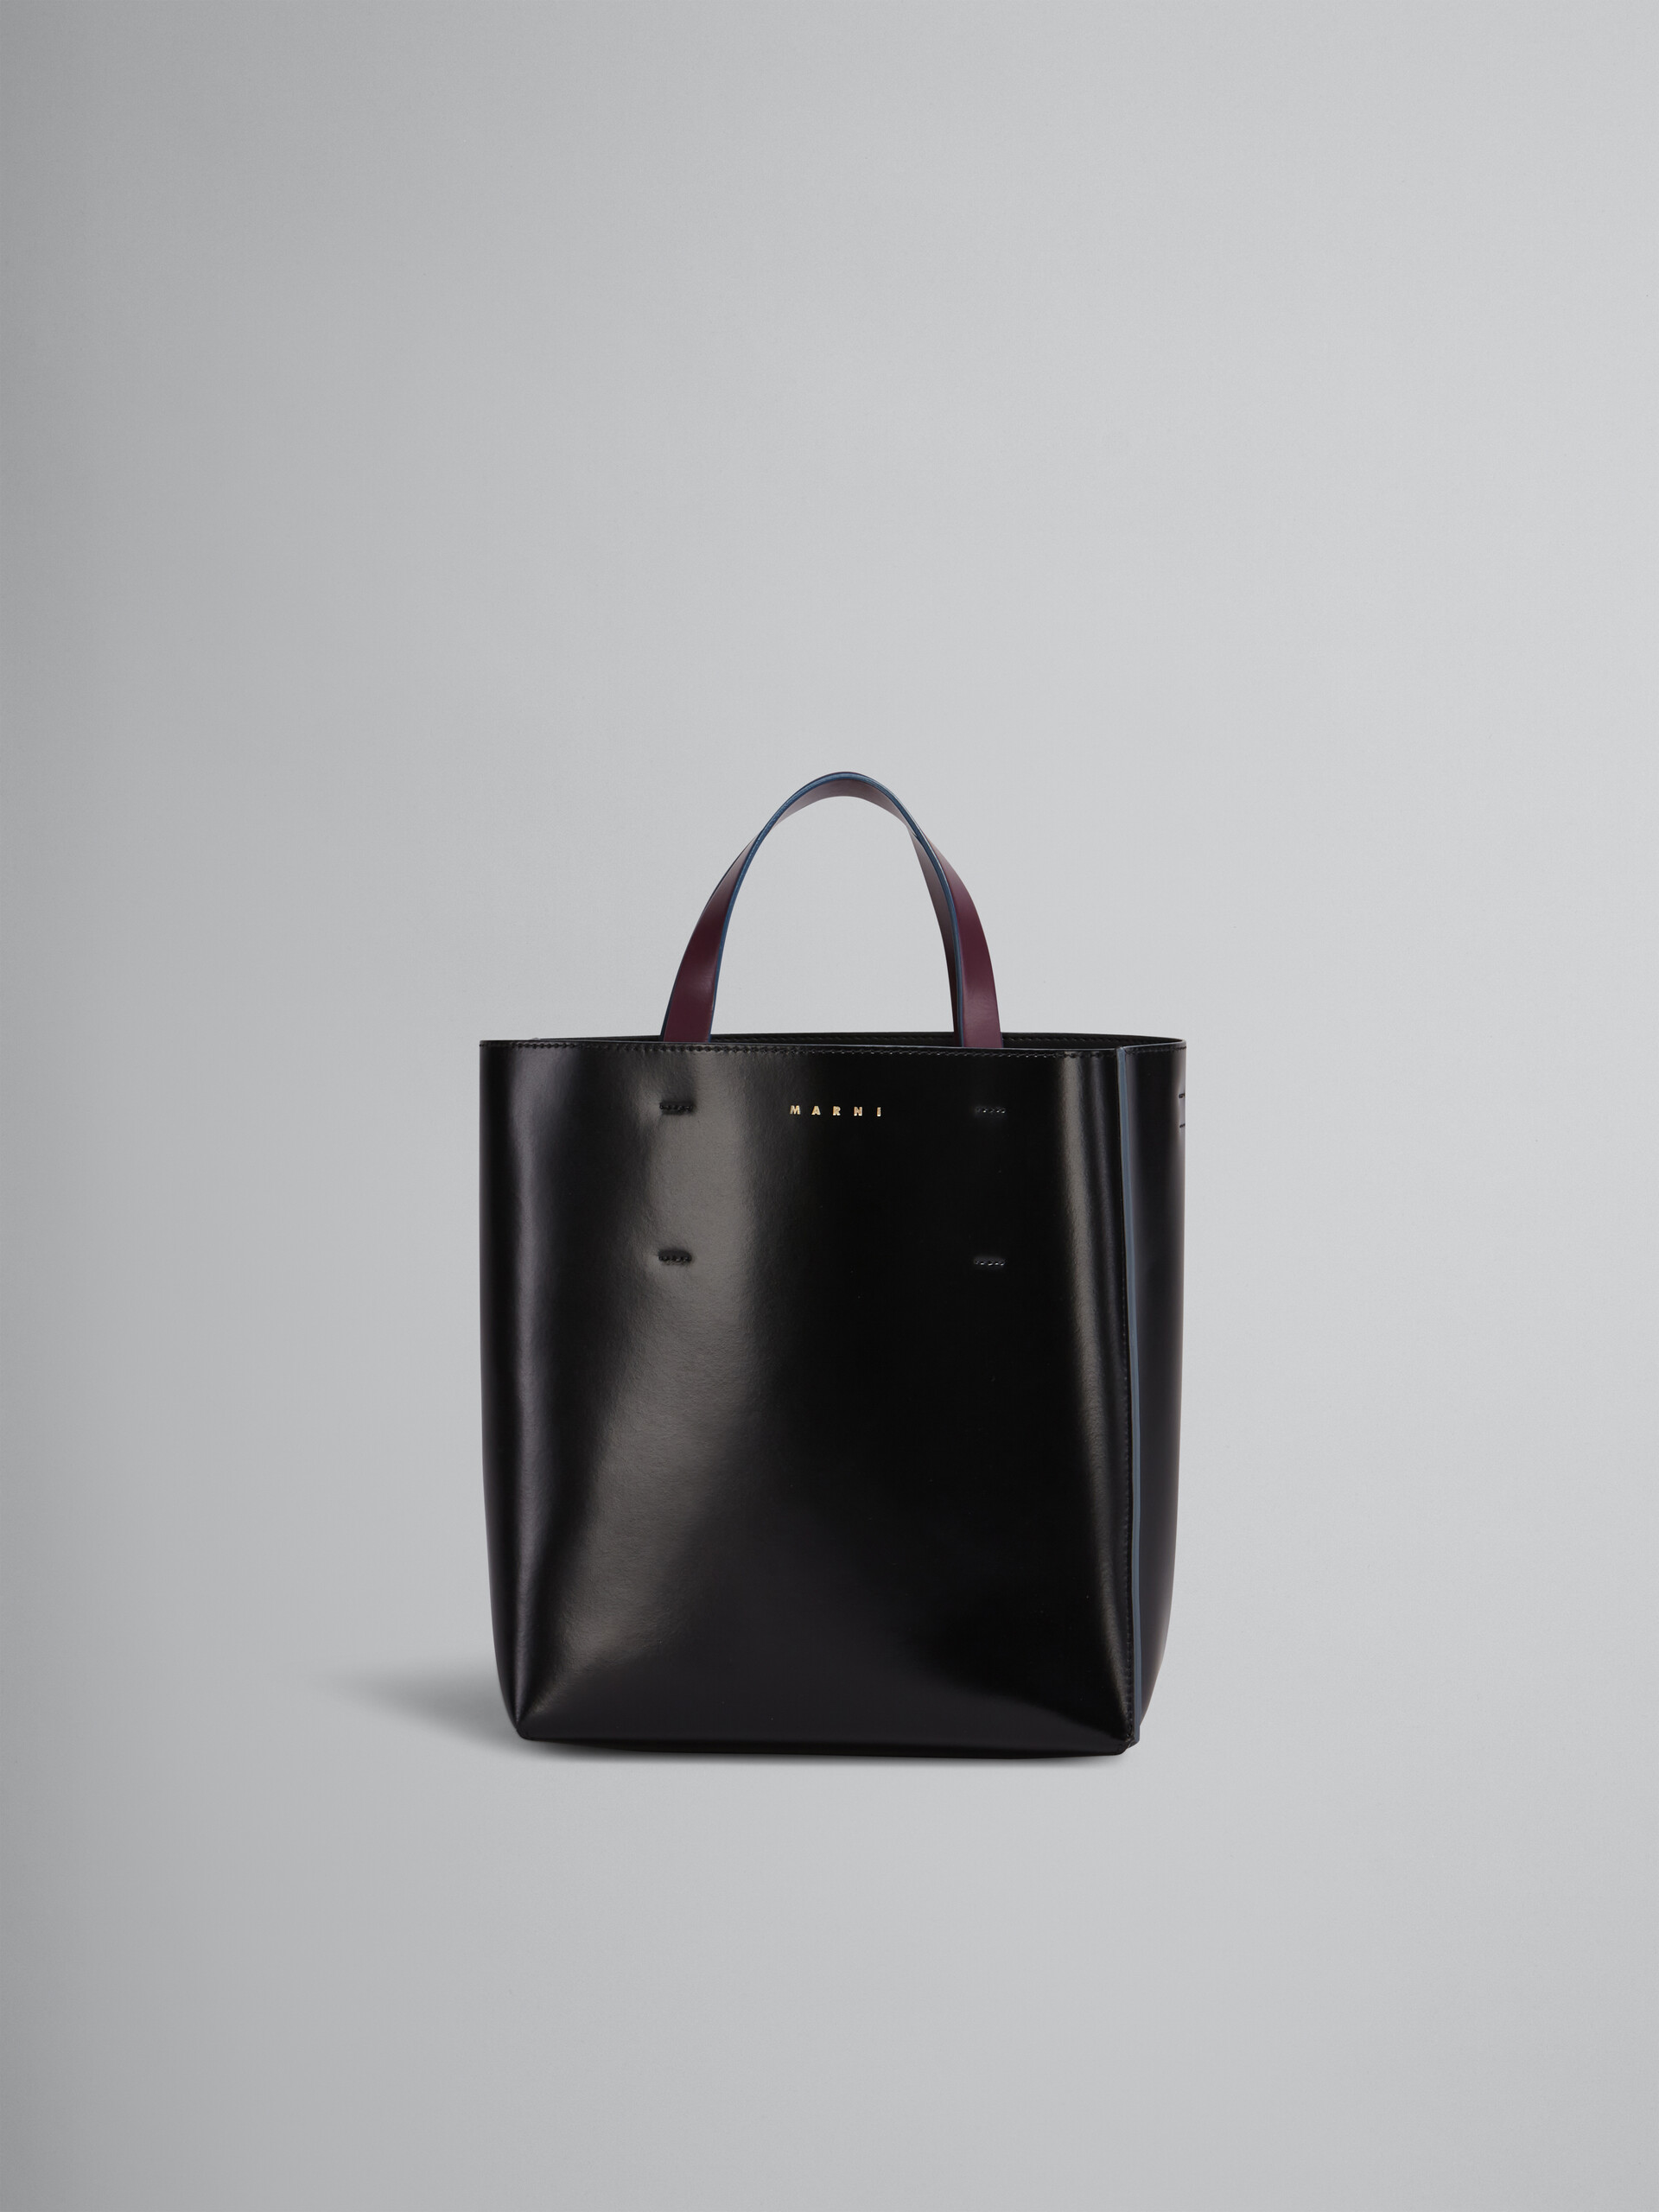 MUSEO shopping bag in shiny smooth calfskin - Shopping Bags - Image 1